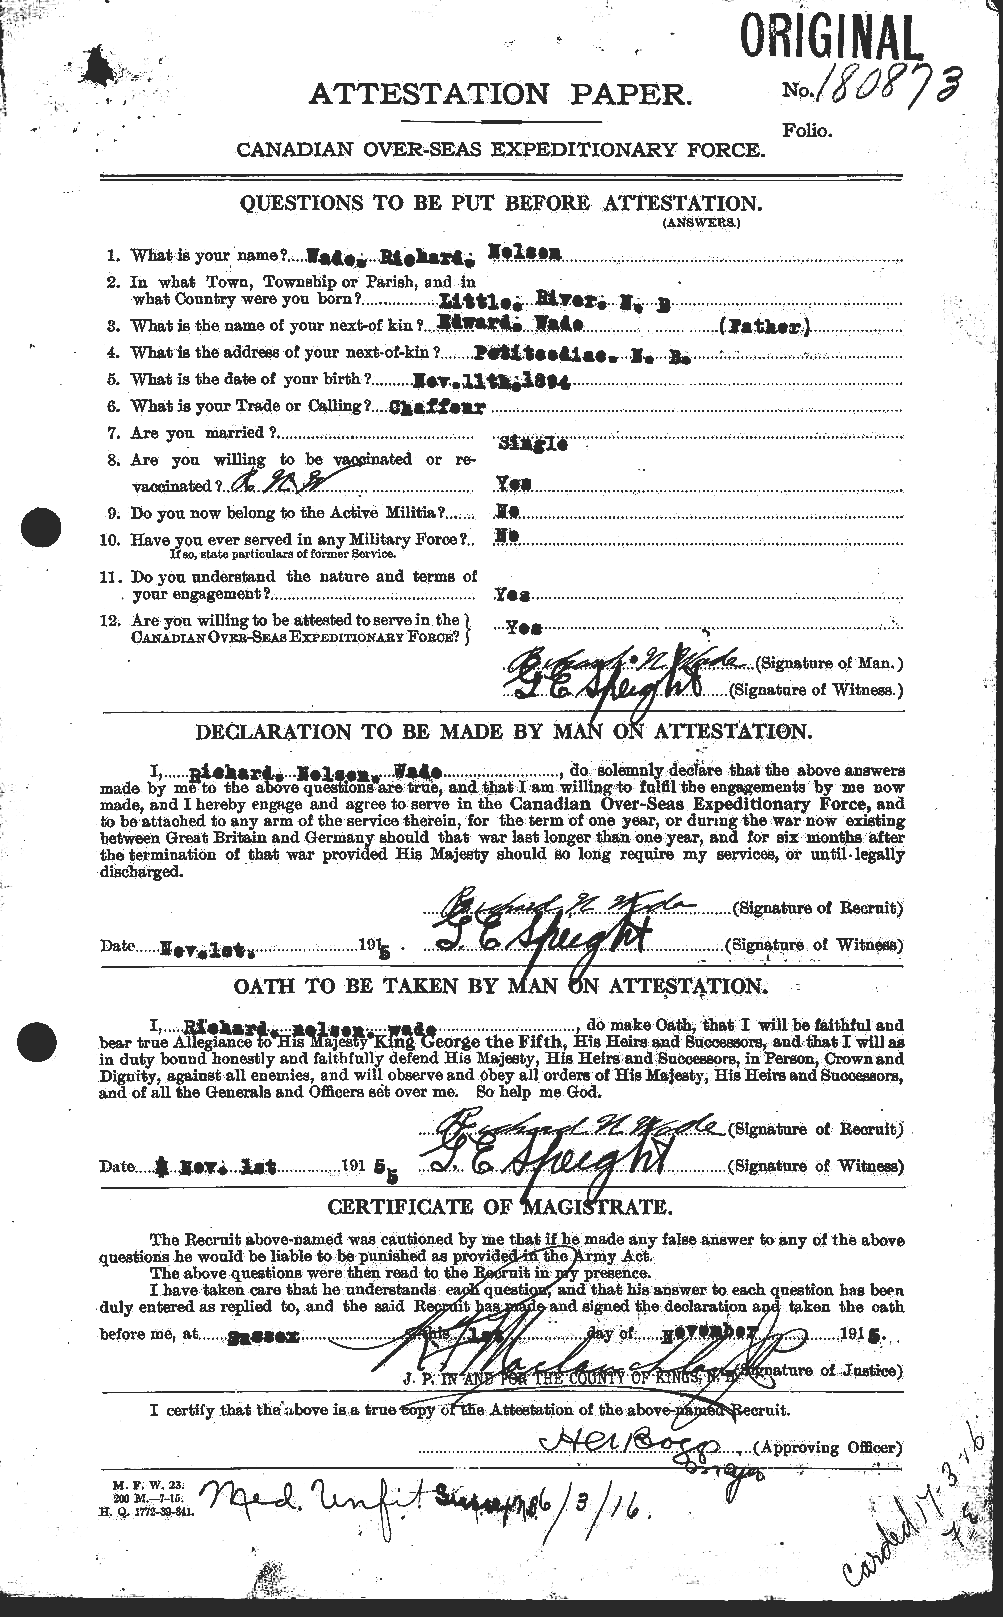 Personnel Records of the First World War - CEF 651291a